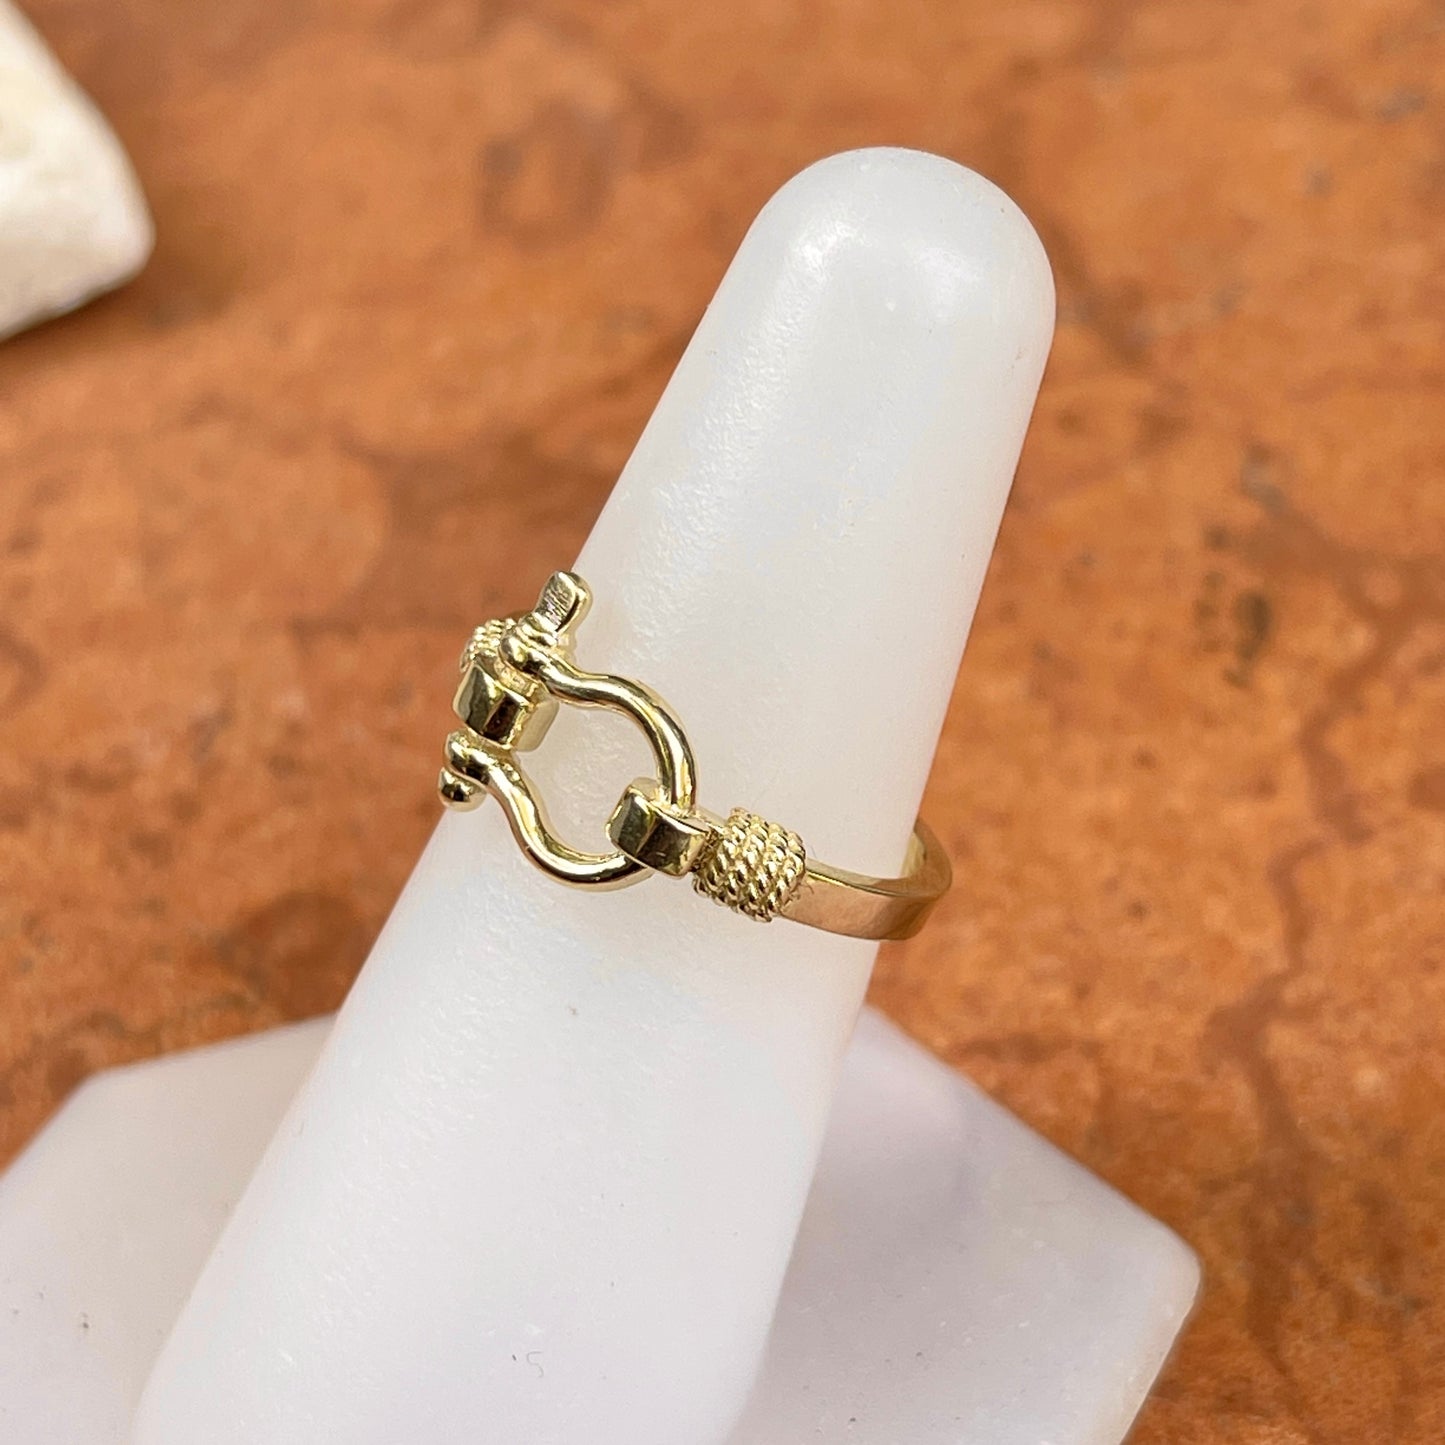 10KT Yellow Gold Shackle Rope Edge Ring